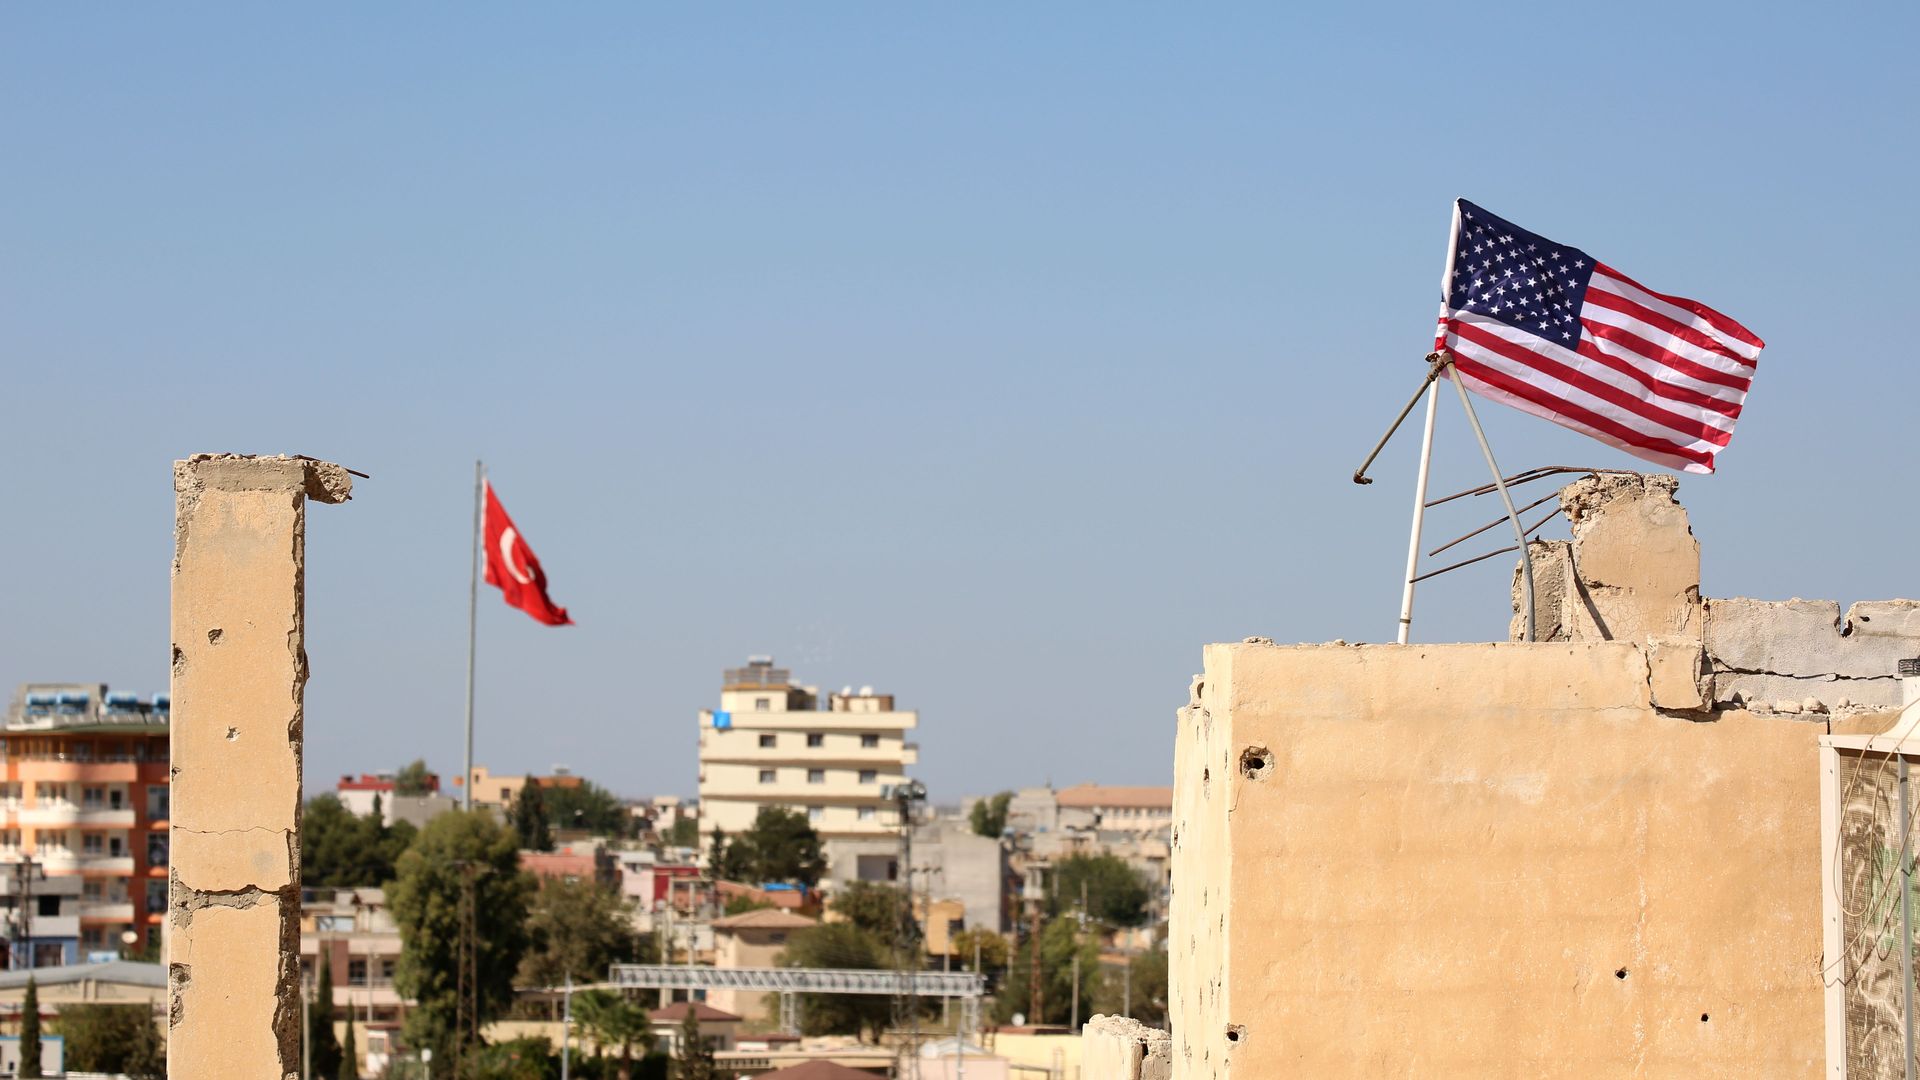 A picture taken on September 17, 2016 shows an American flag (R) fluttering above a building used by the Kurdish police known as the Asayish, in the Syrian town of Tal Abyad.